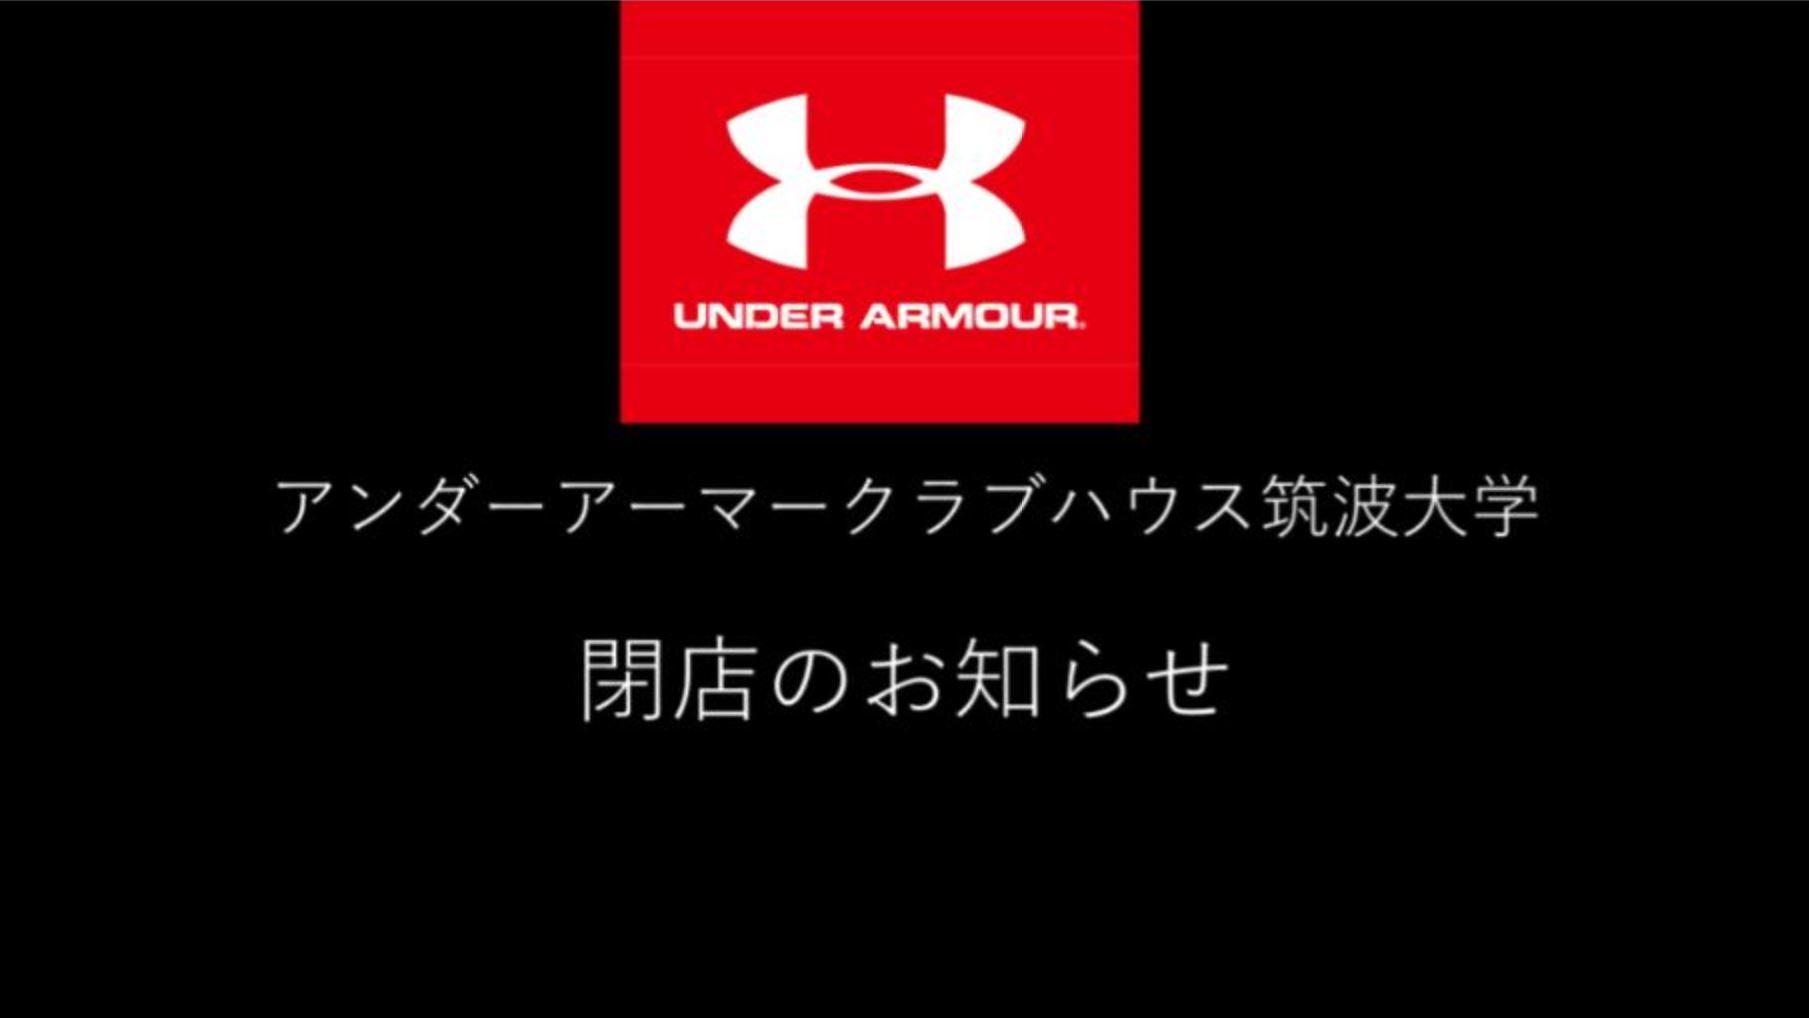 UNDER ARMOUR CLUBHOUSE 筑波大学 | SHOP BLOG | UNDER ARMOUR